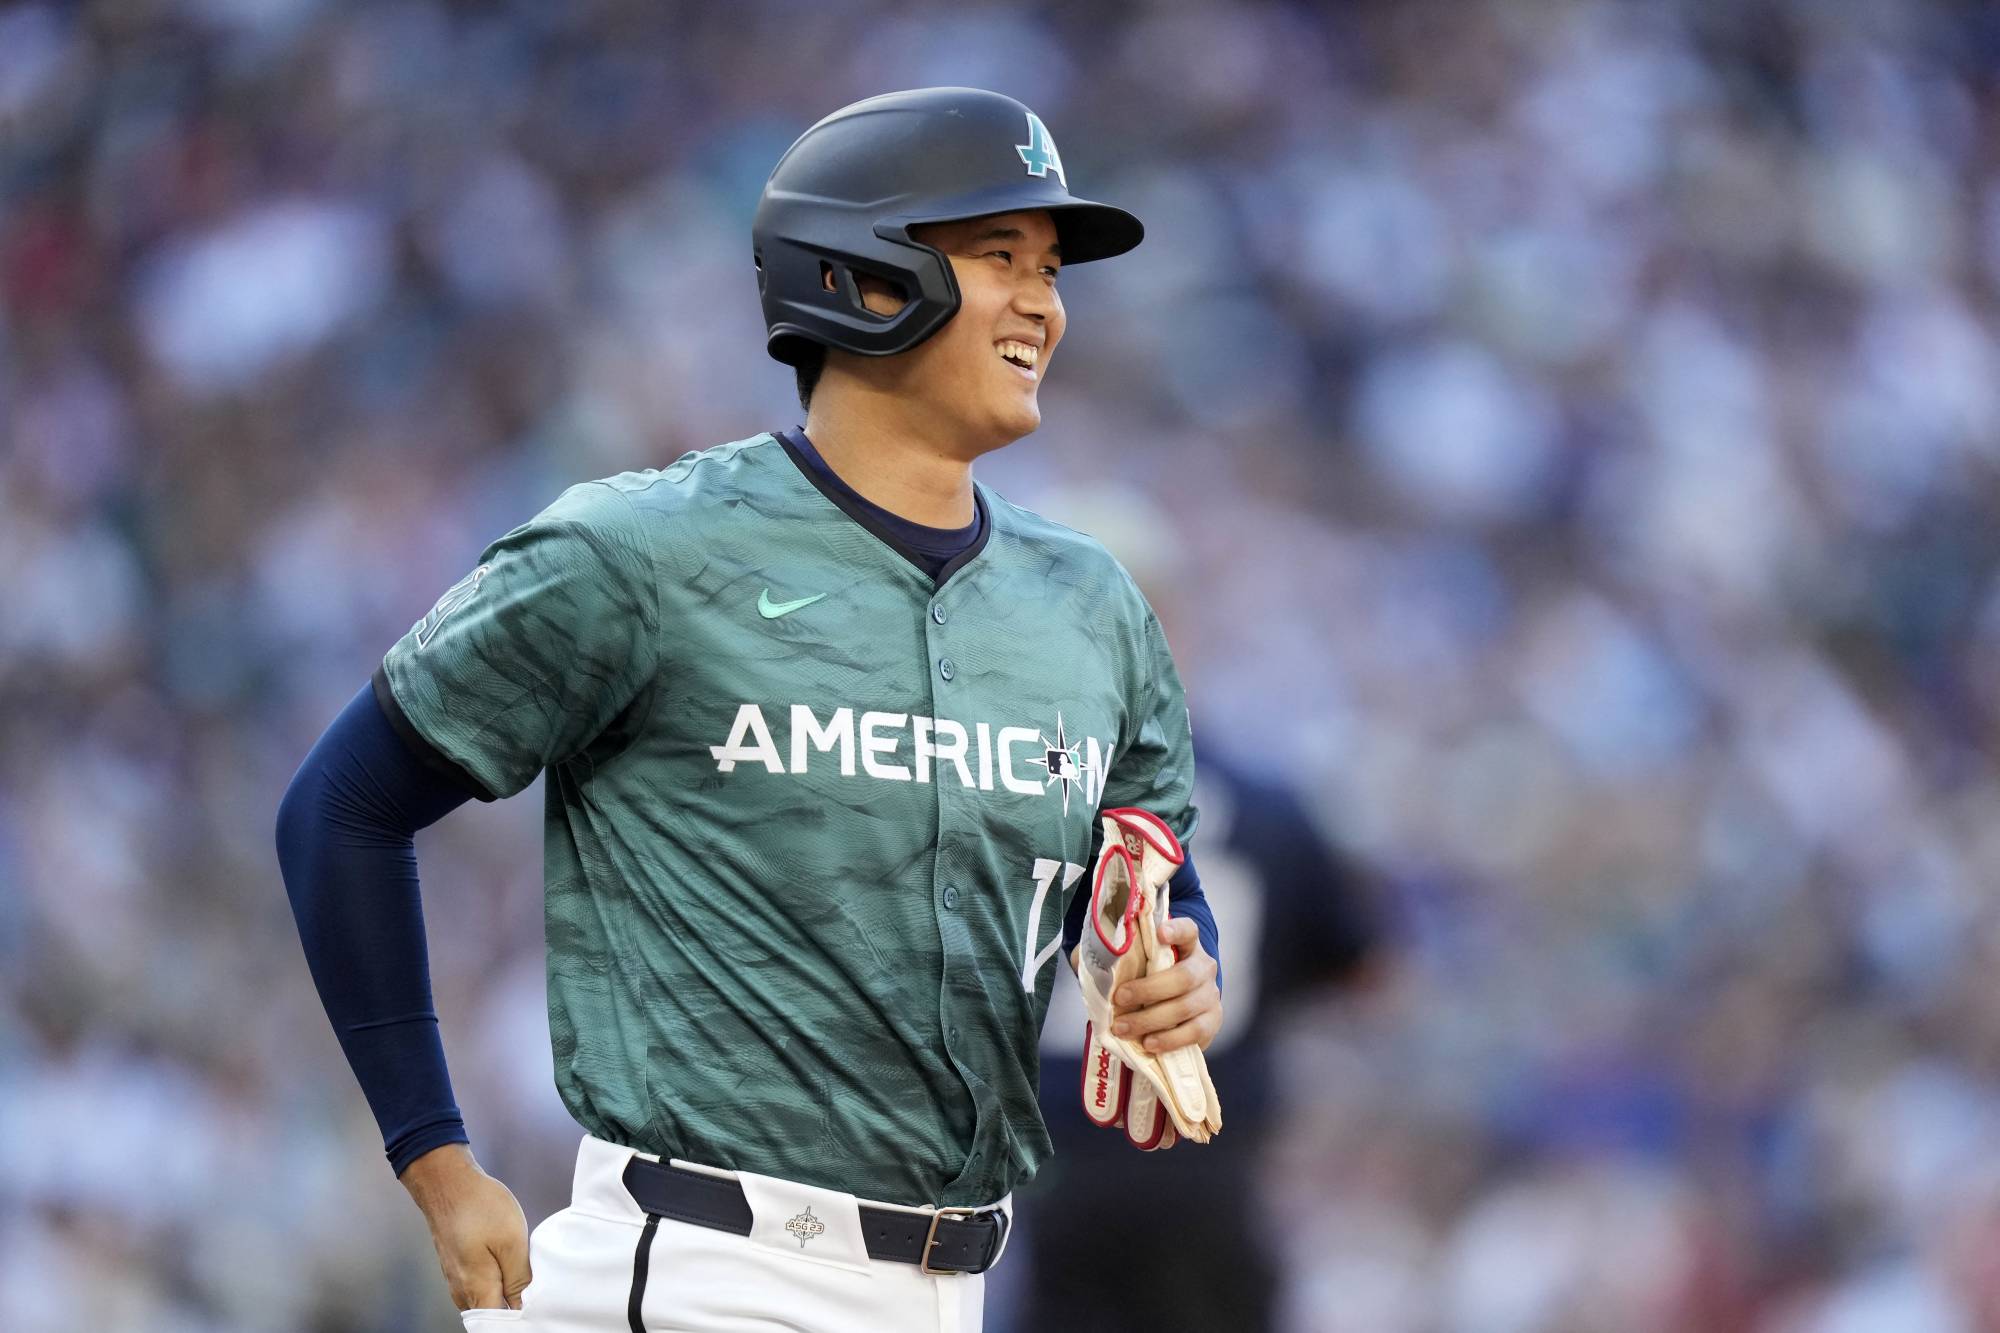 Shohei Ohtani's MLB All-Star Game jersey up for auction – over $100K